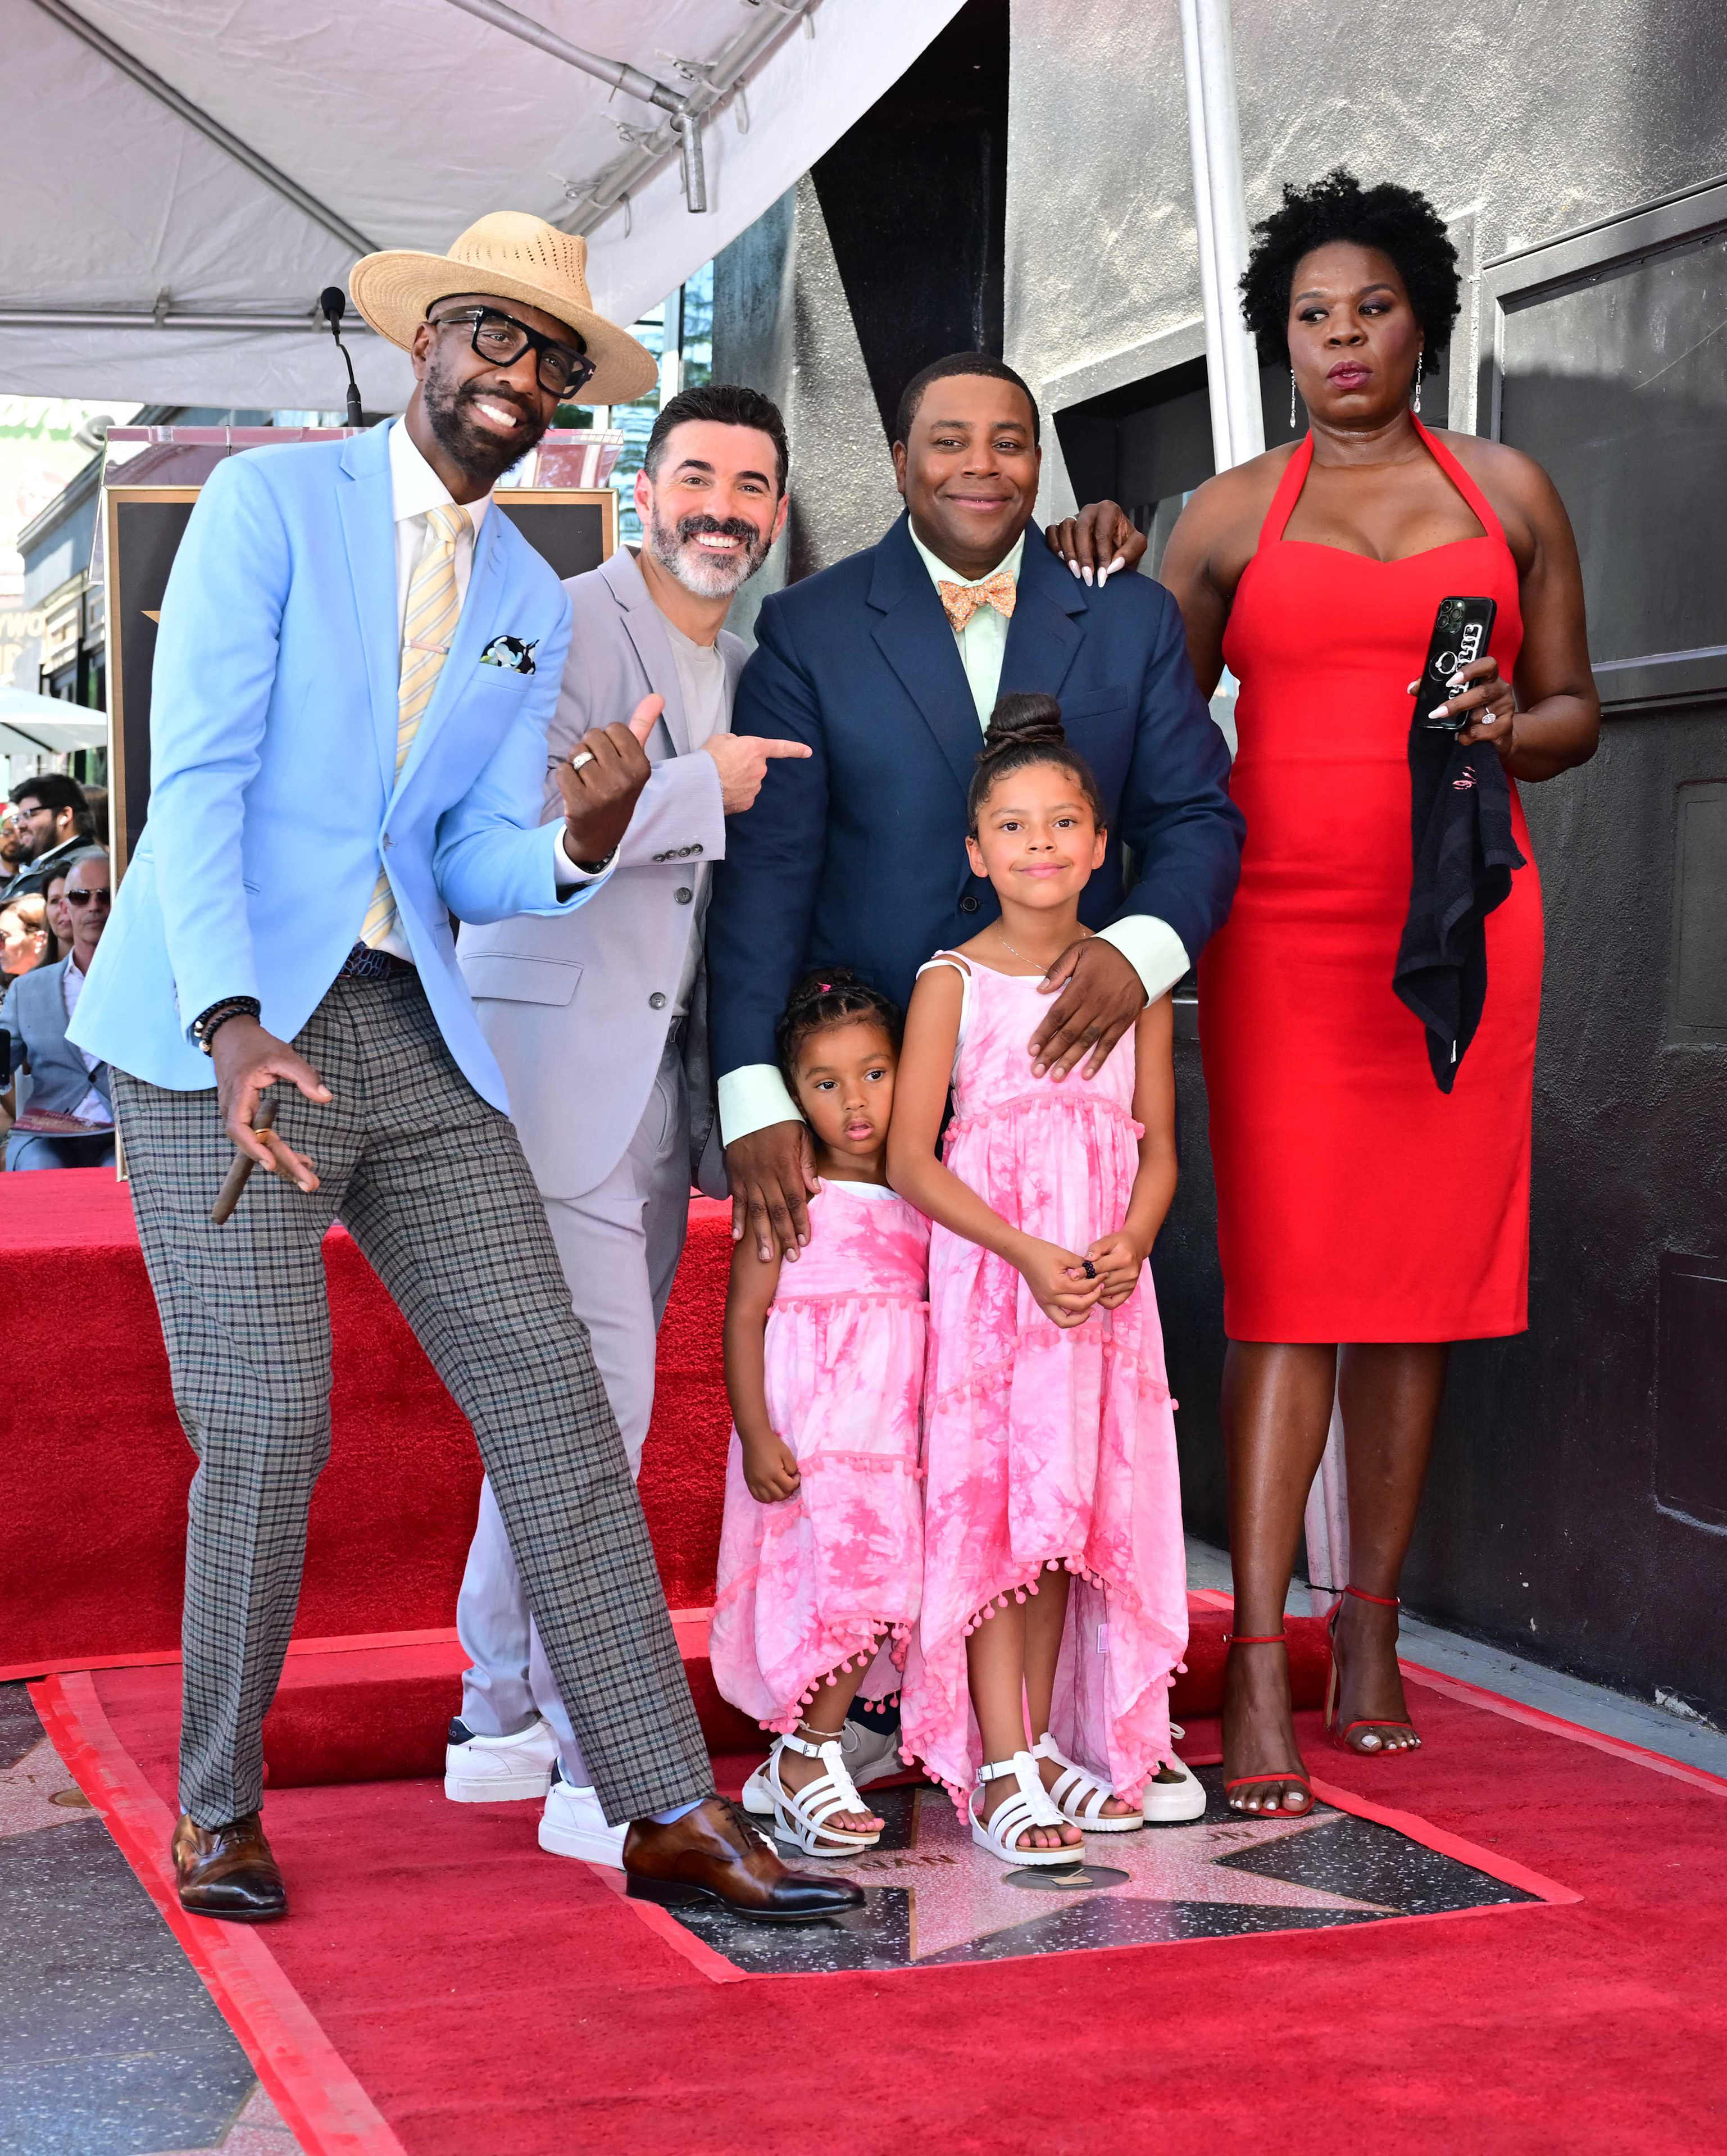 Thompson brought his two daughters, comedian JB Smoove, Josh Server and former "SNL" castmate Leslie Jones for the Aug. 11 ceremony. Thompson's star was placed next to that of  "SNL" executive producer Lorne Michaels. <br> <br> "This is about what an artist means and that is to provide for others. That's been my lifelong privilege," Thompson said during his acceptance speech. "Here's to the future!"